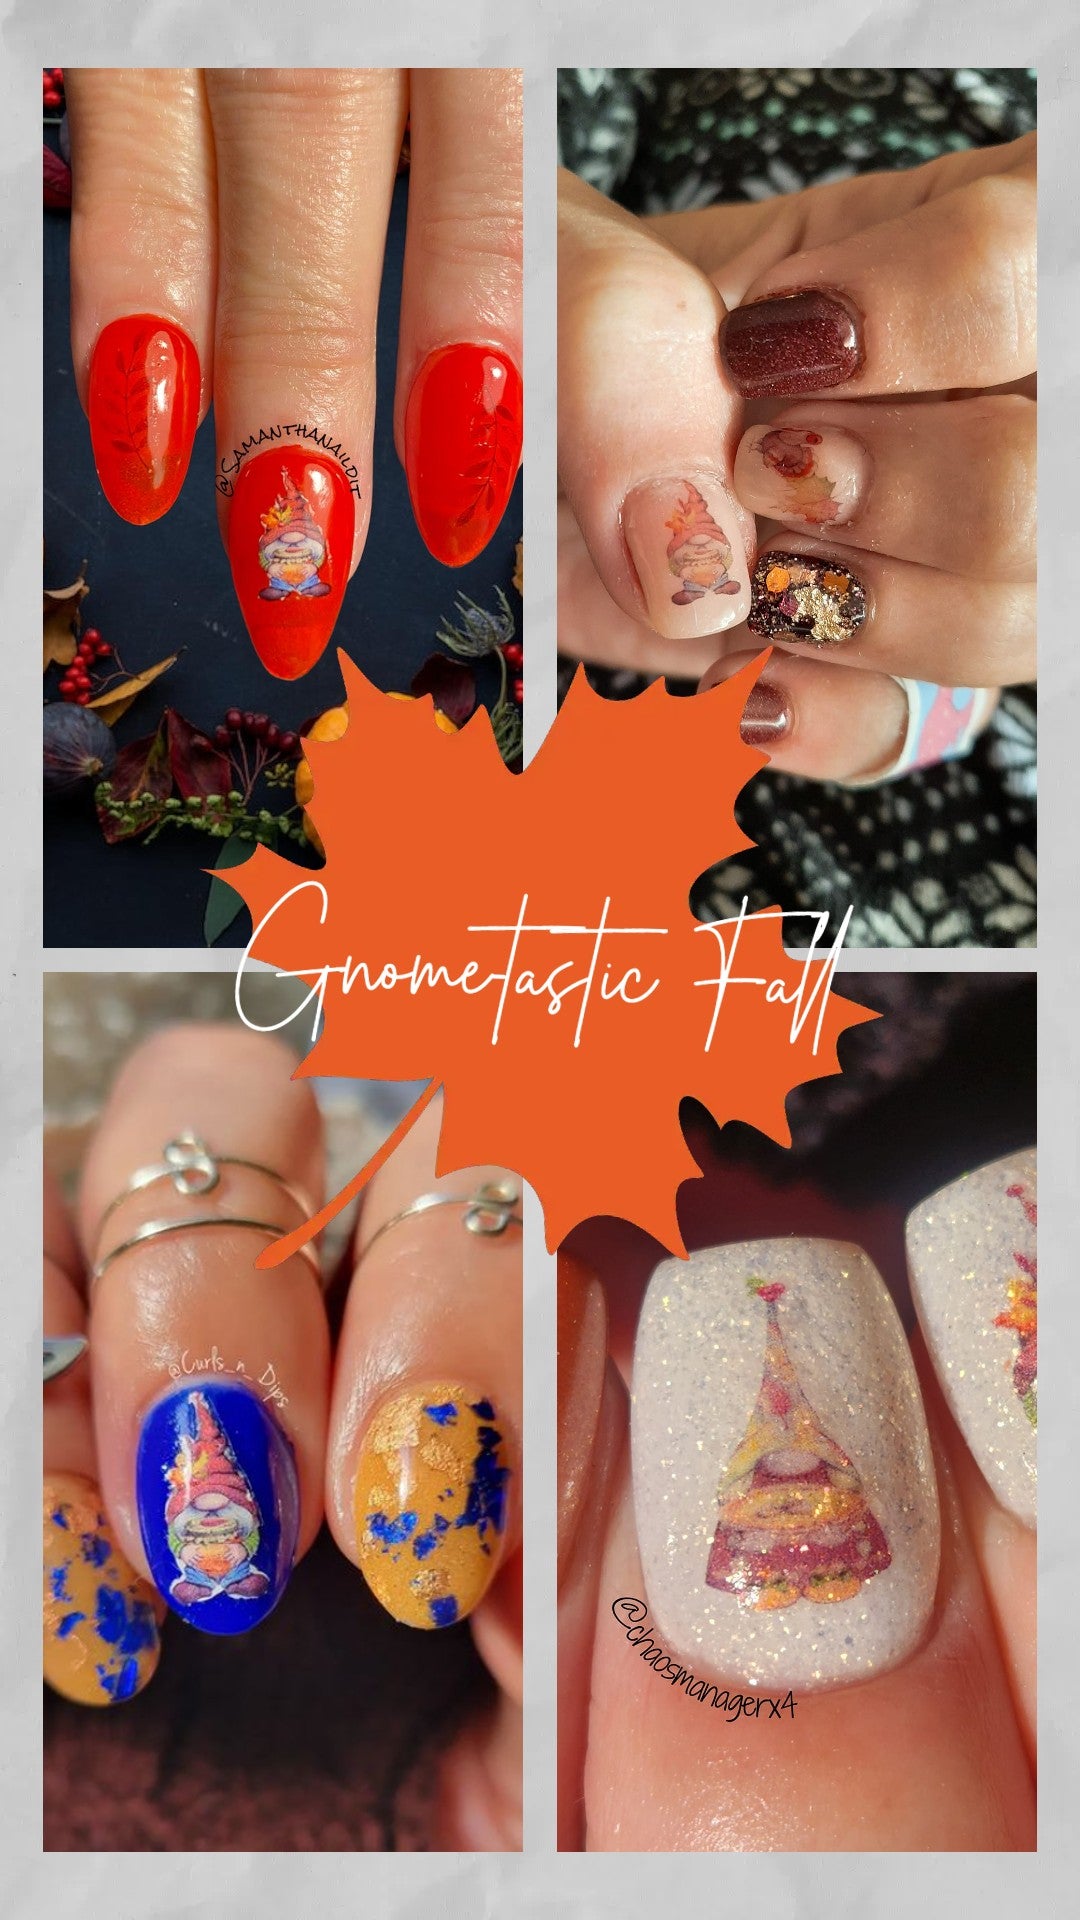 Autumn Manicure. Beautyful Nails Design With Autumn Leaves. Top View. Cozy  Autumn Image. Stock Photo, Picture and Royalty Free Image. Image 136281455.